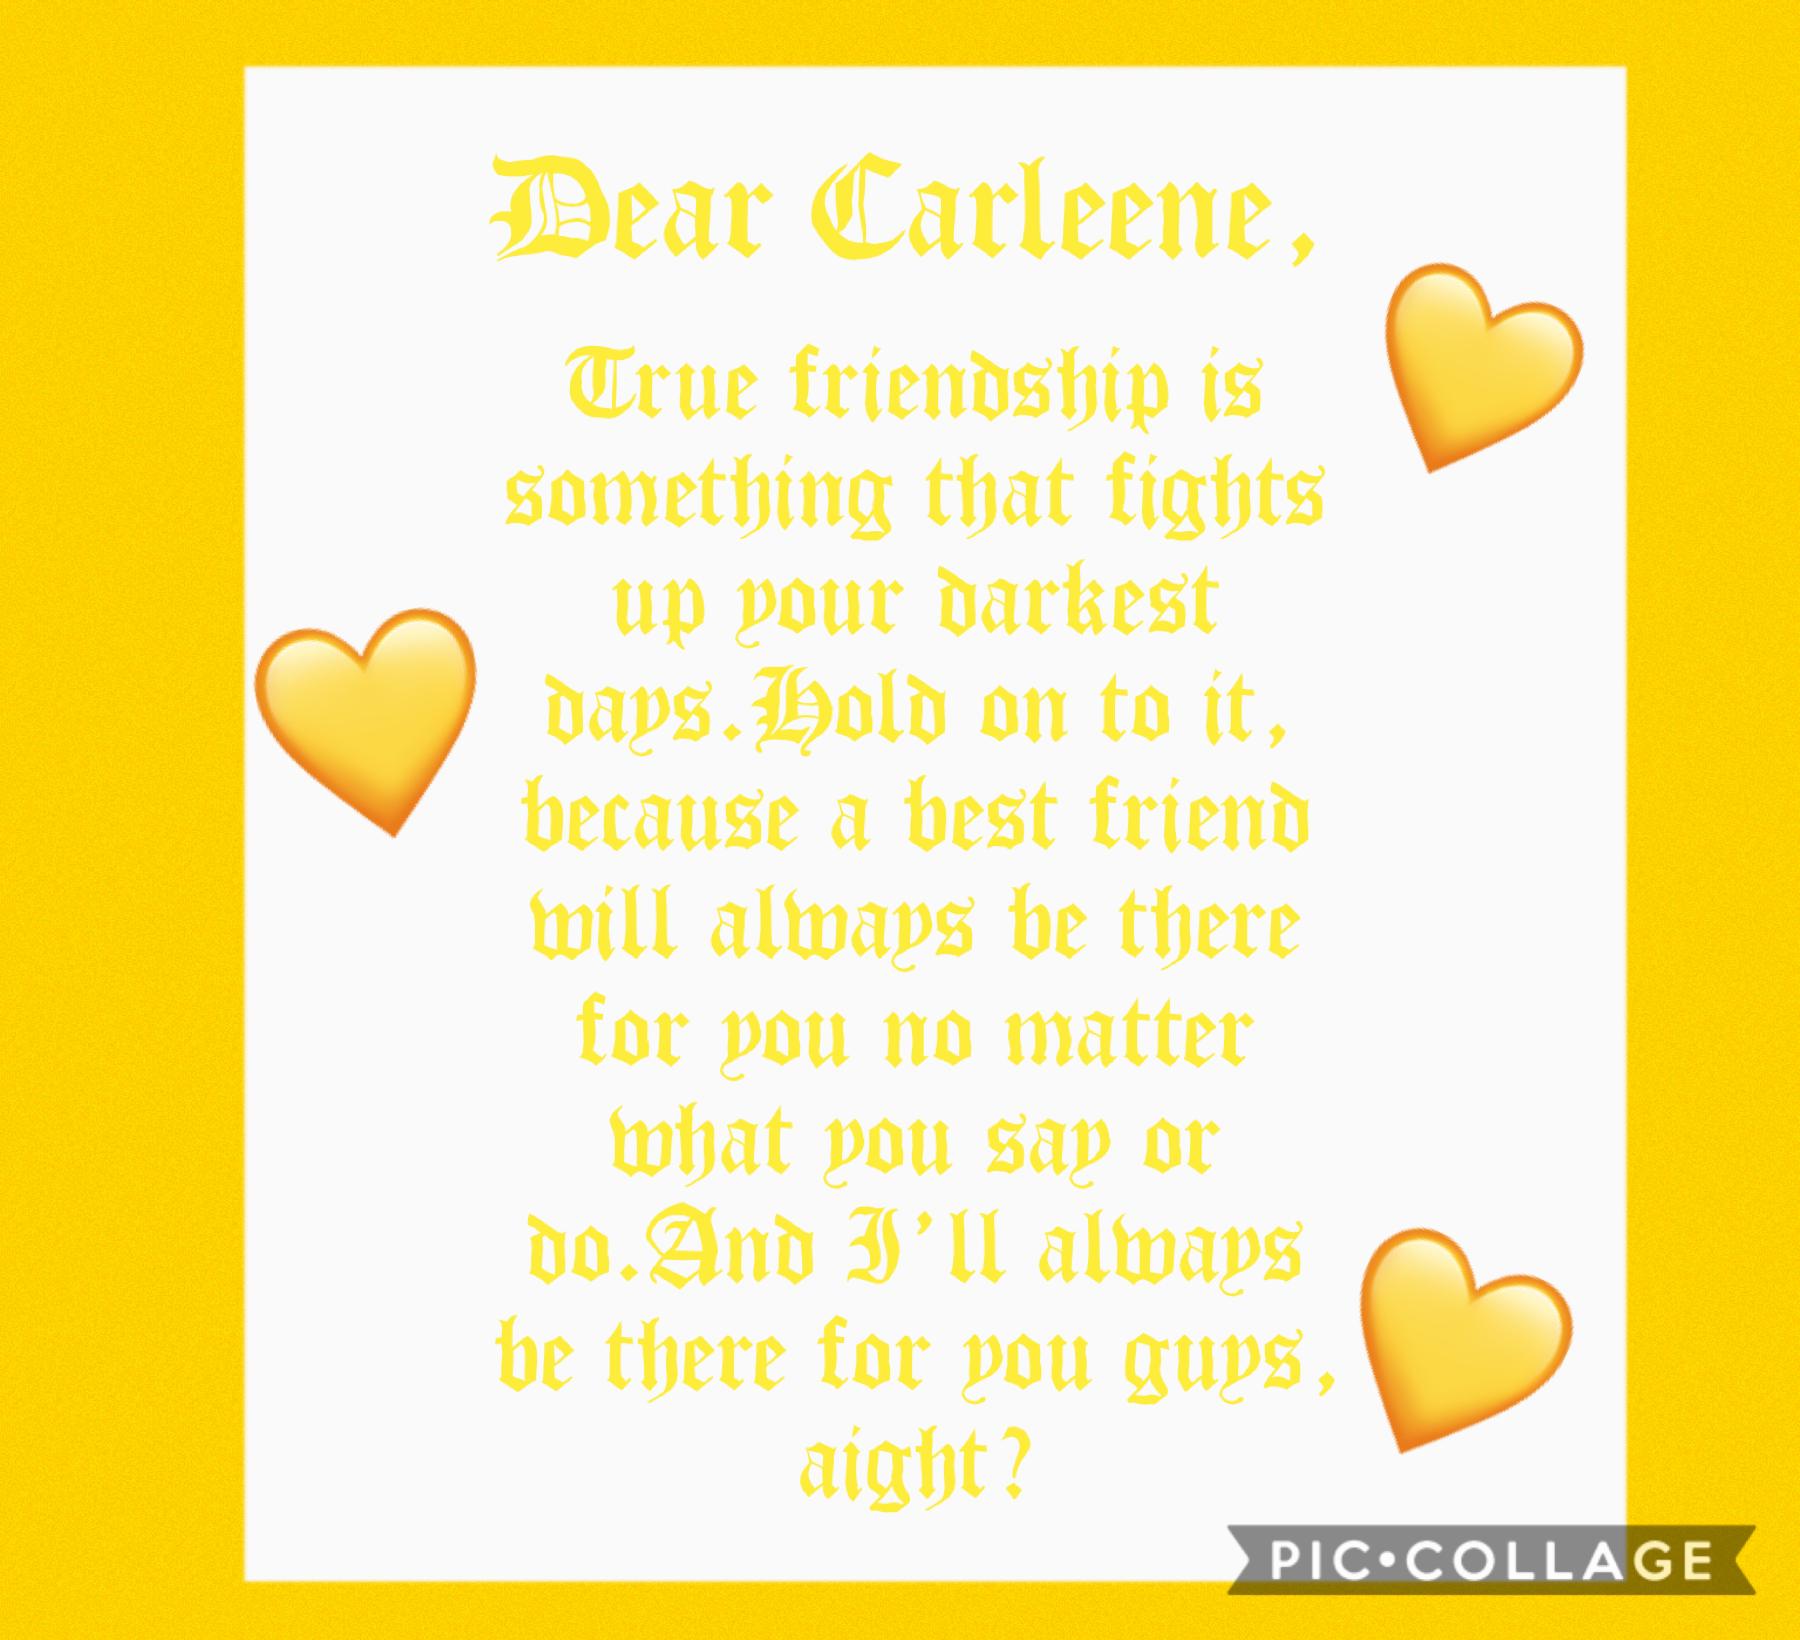 This is for carleene💛